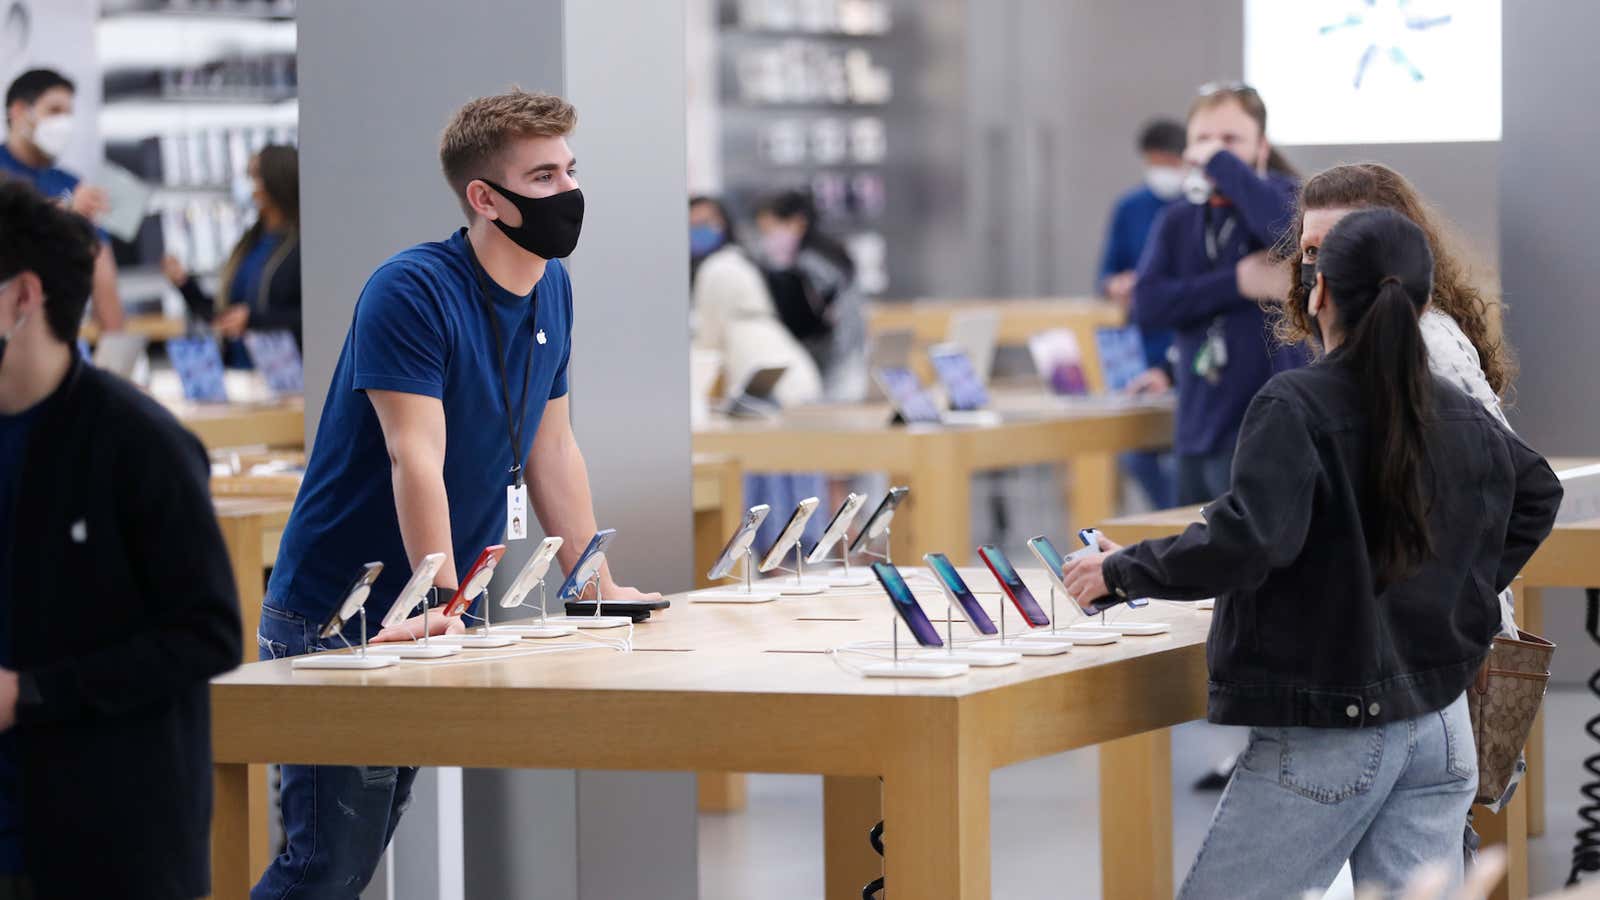 Apple's fledgling union effort already improved benefits for its retail employees